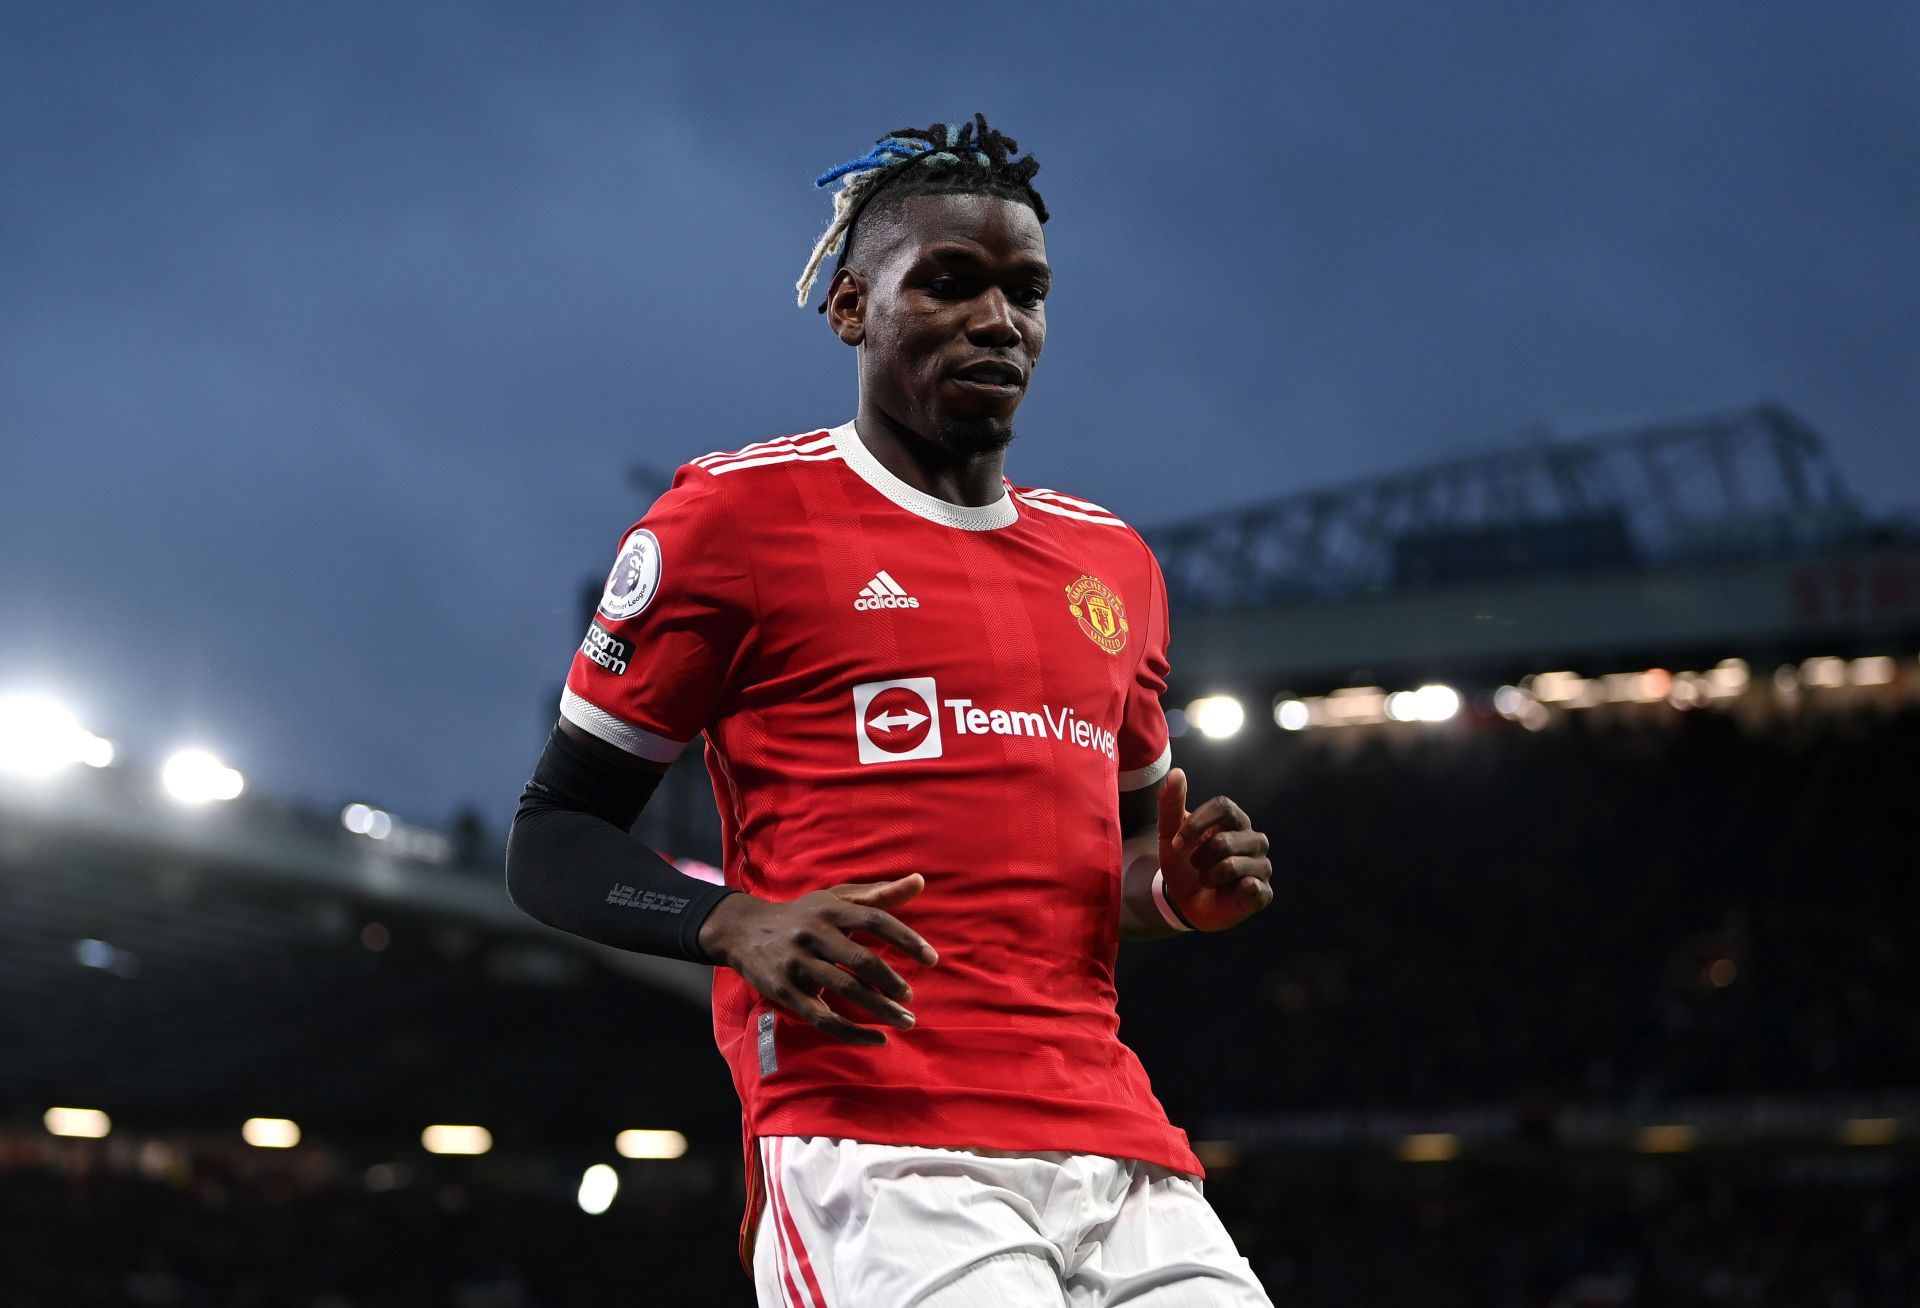 Ralf Rangnick has no intention of convincing Paul Pogba to stay at Manchester United.